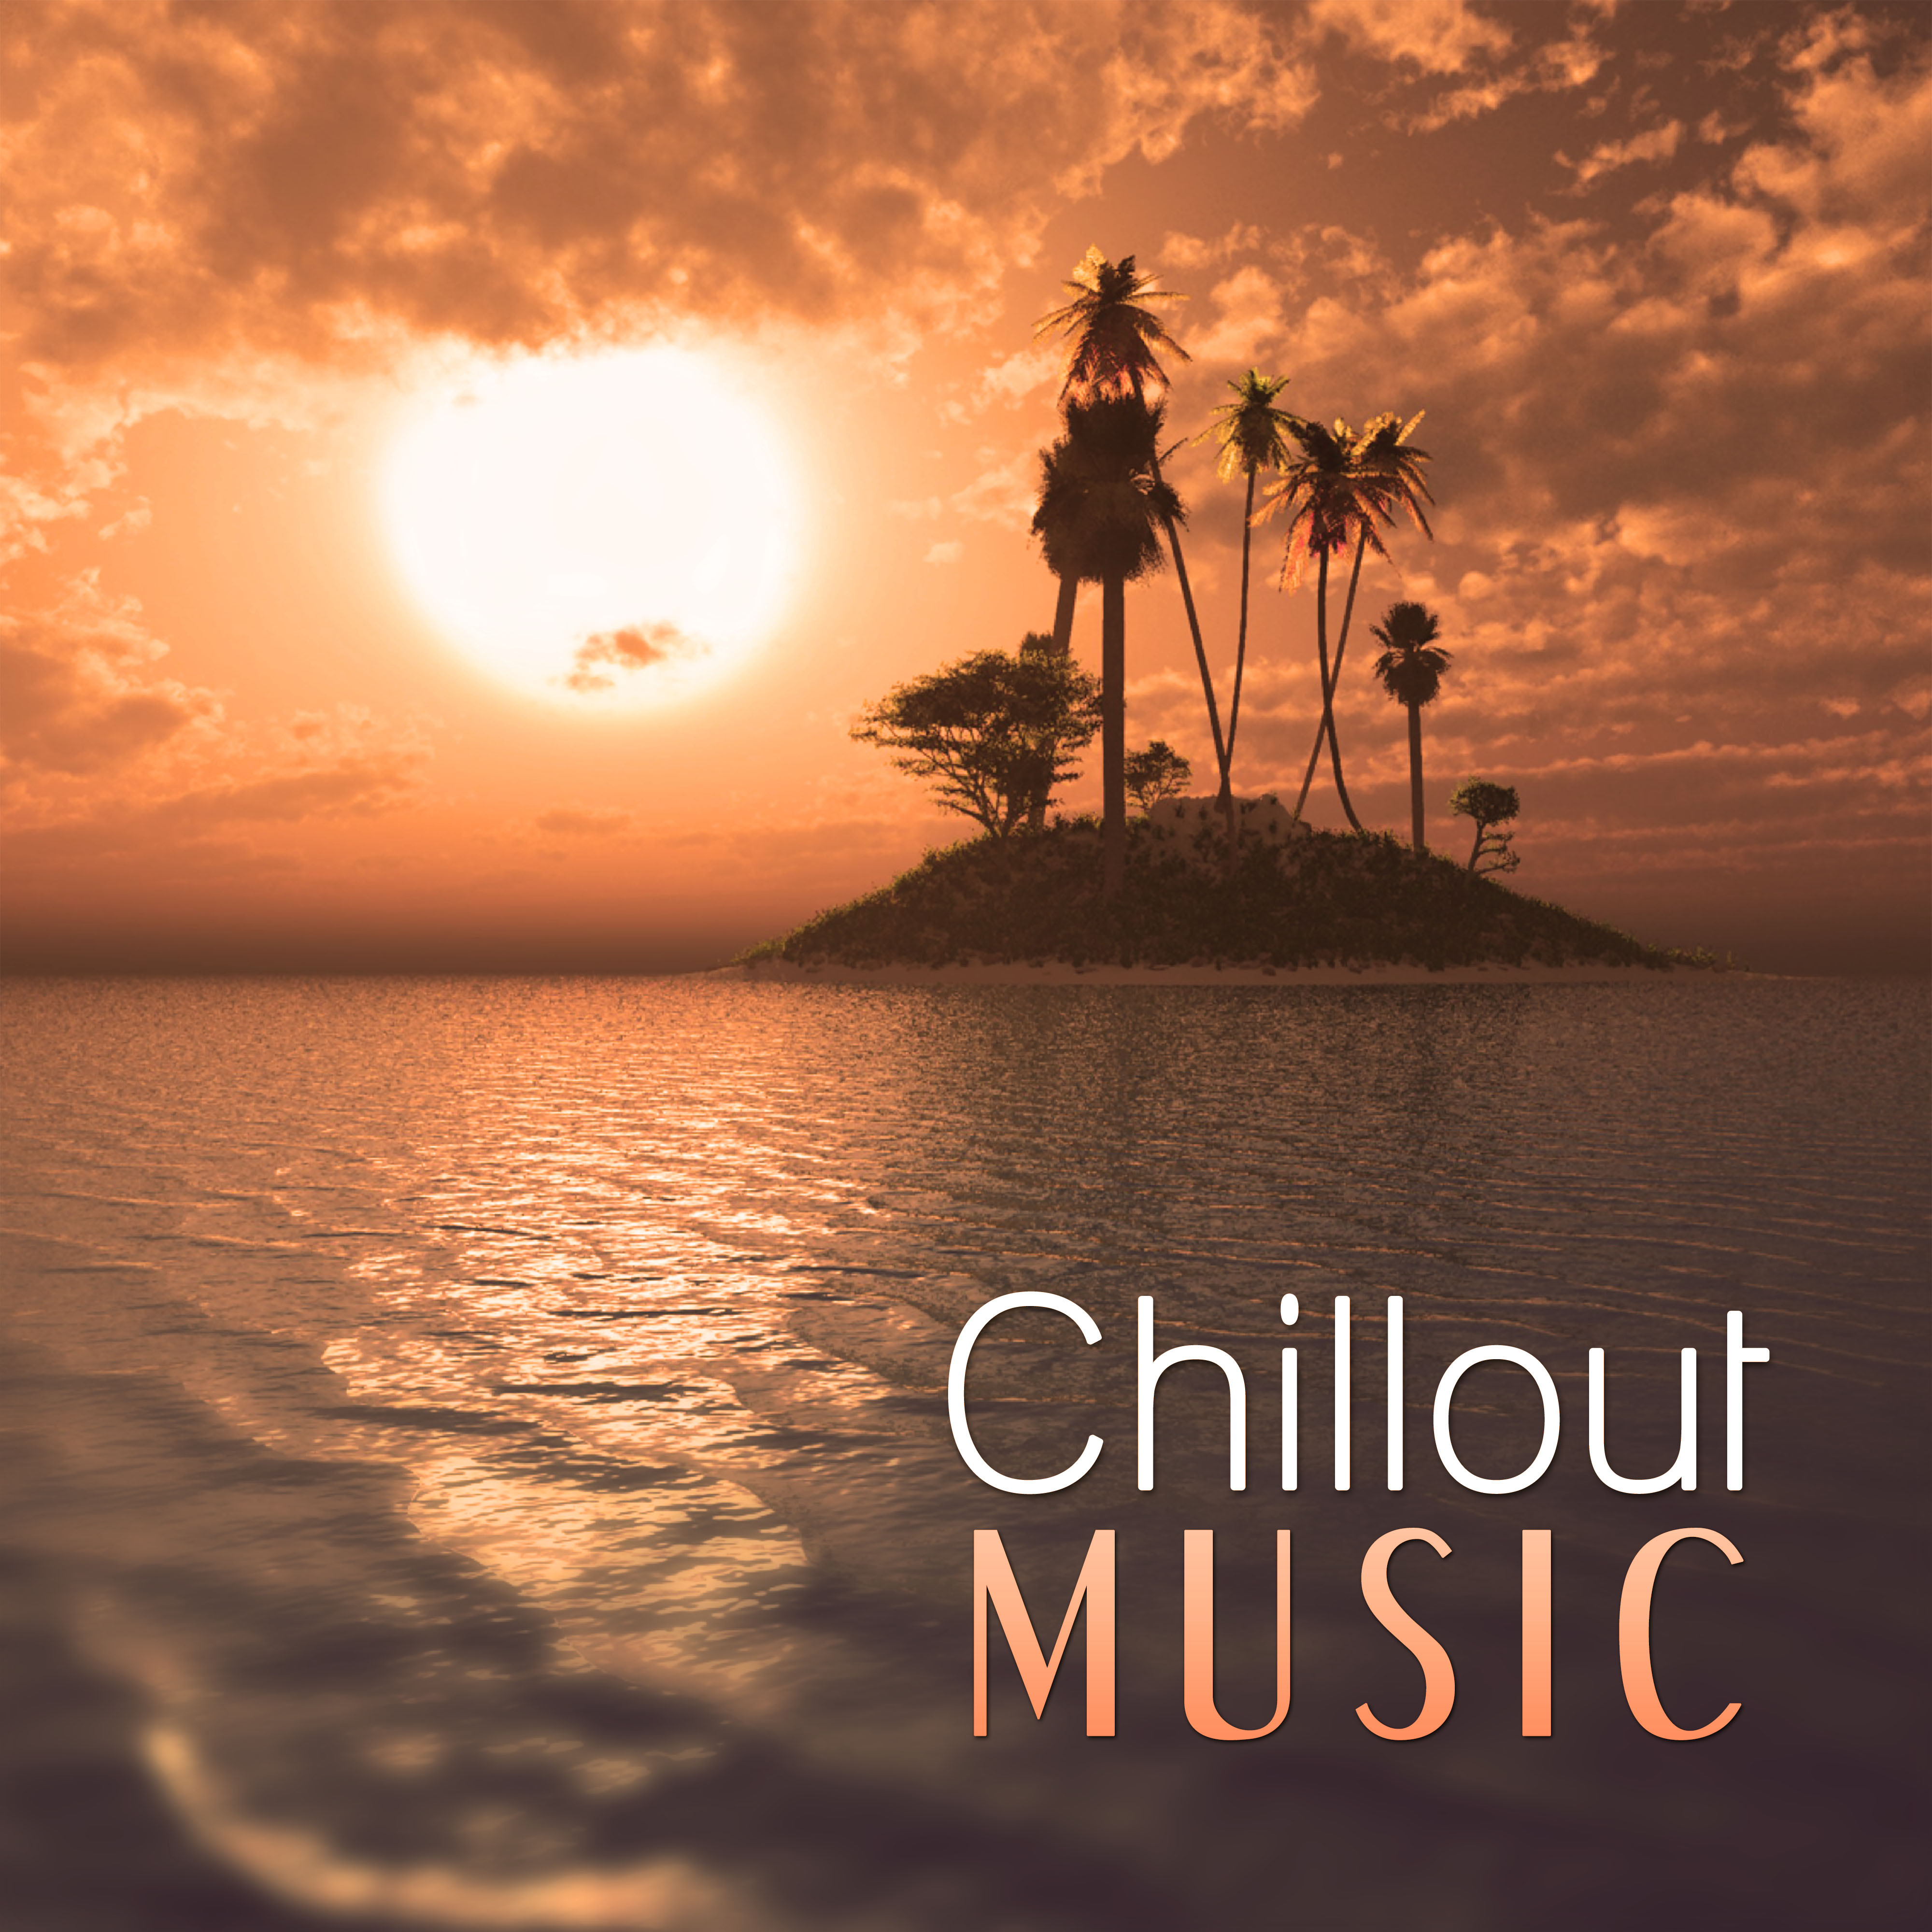 Stand chillout. Чилаут. Chillout картинки. Chill обложка. Баннер Chillout.